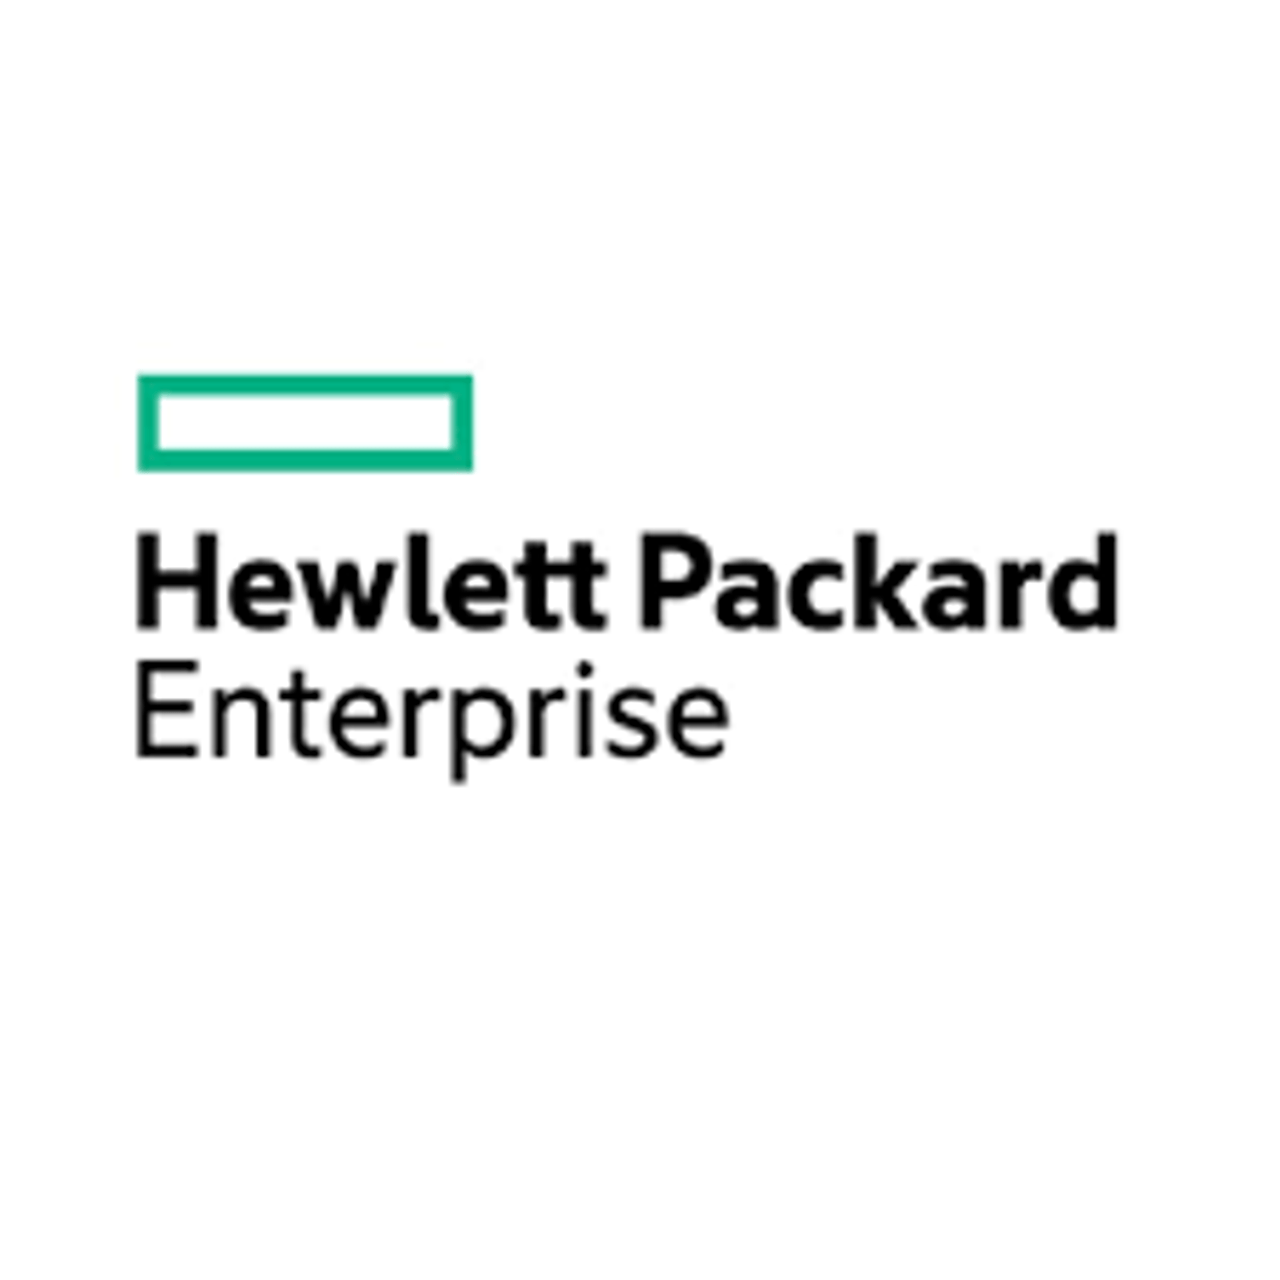 HPE SV3000 2TB 12G SAS 7.2K LFF MDL HDD Factory integrated